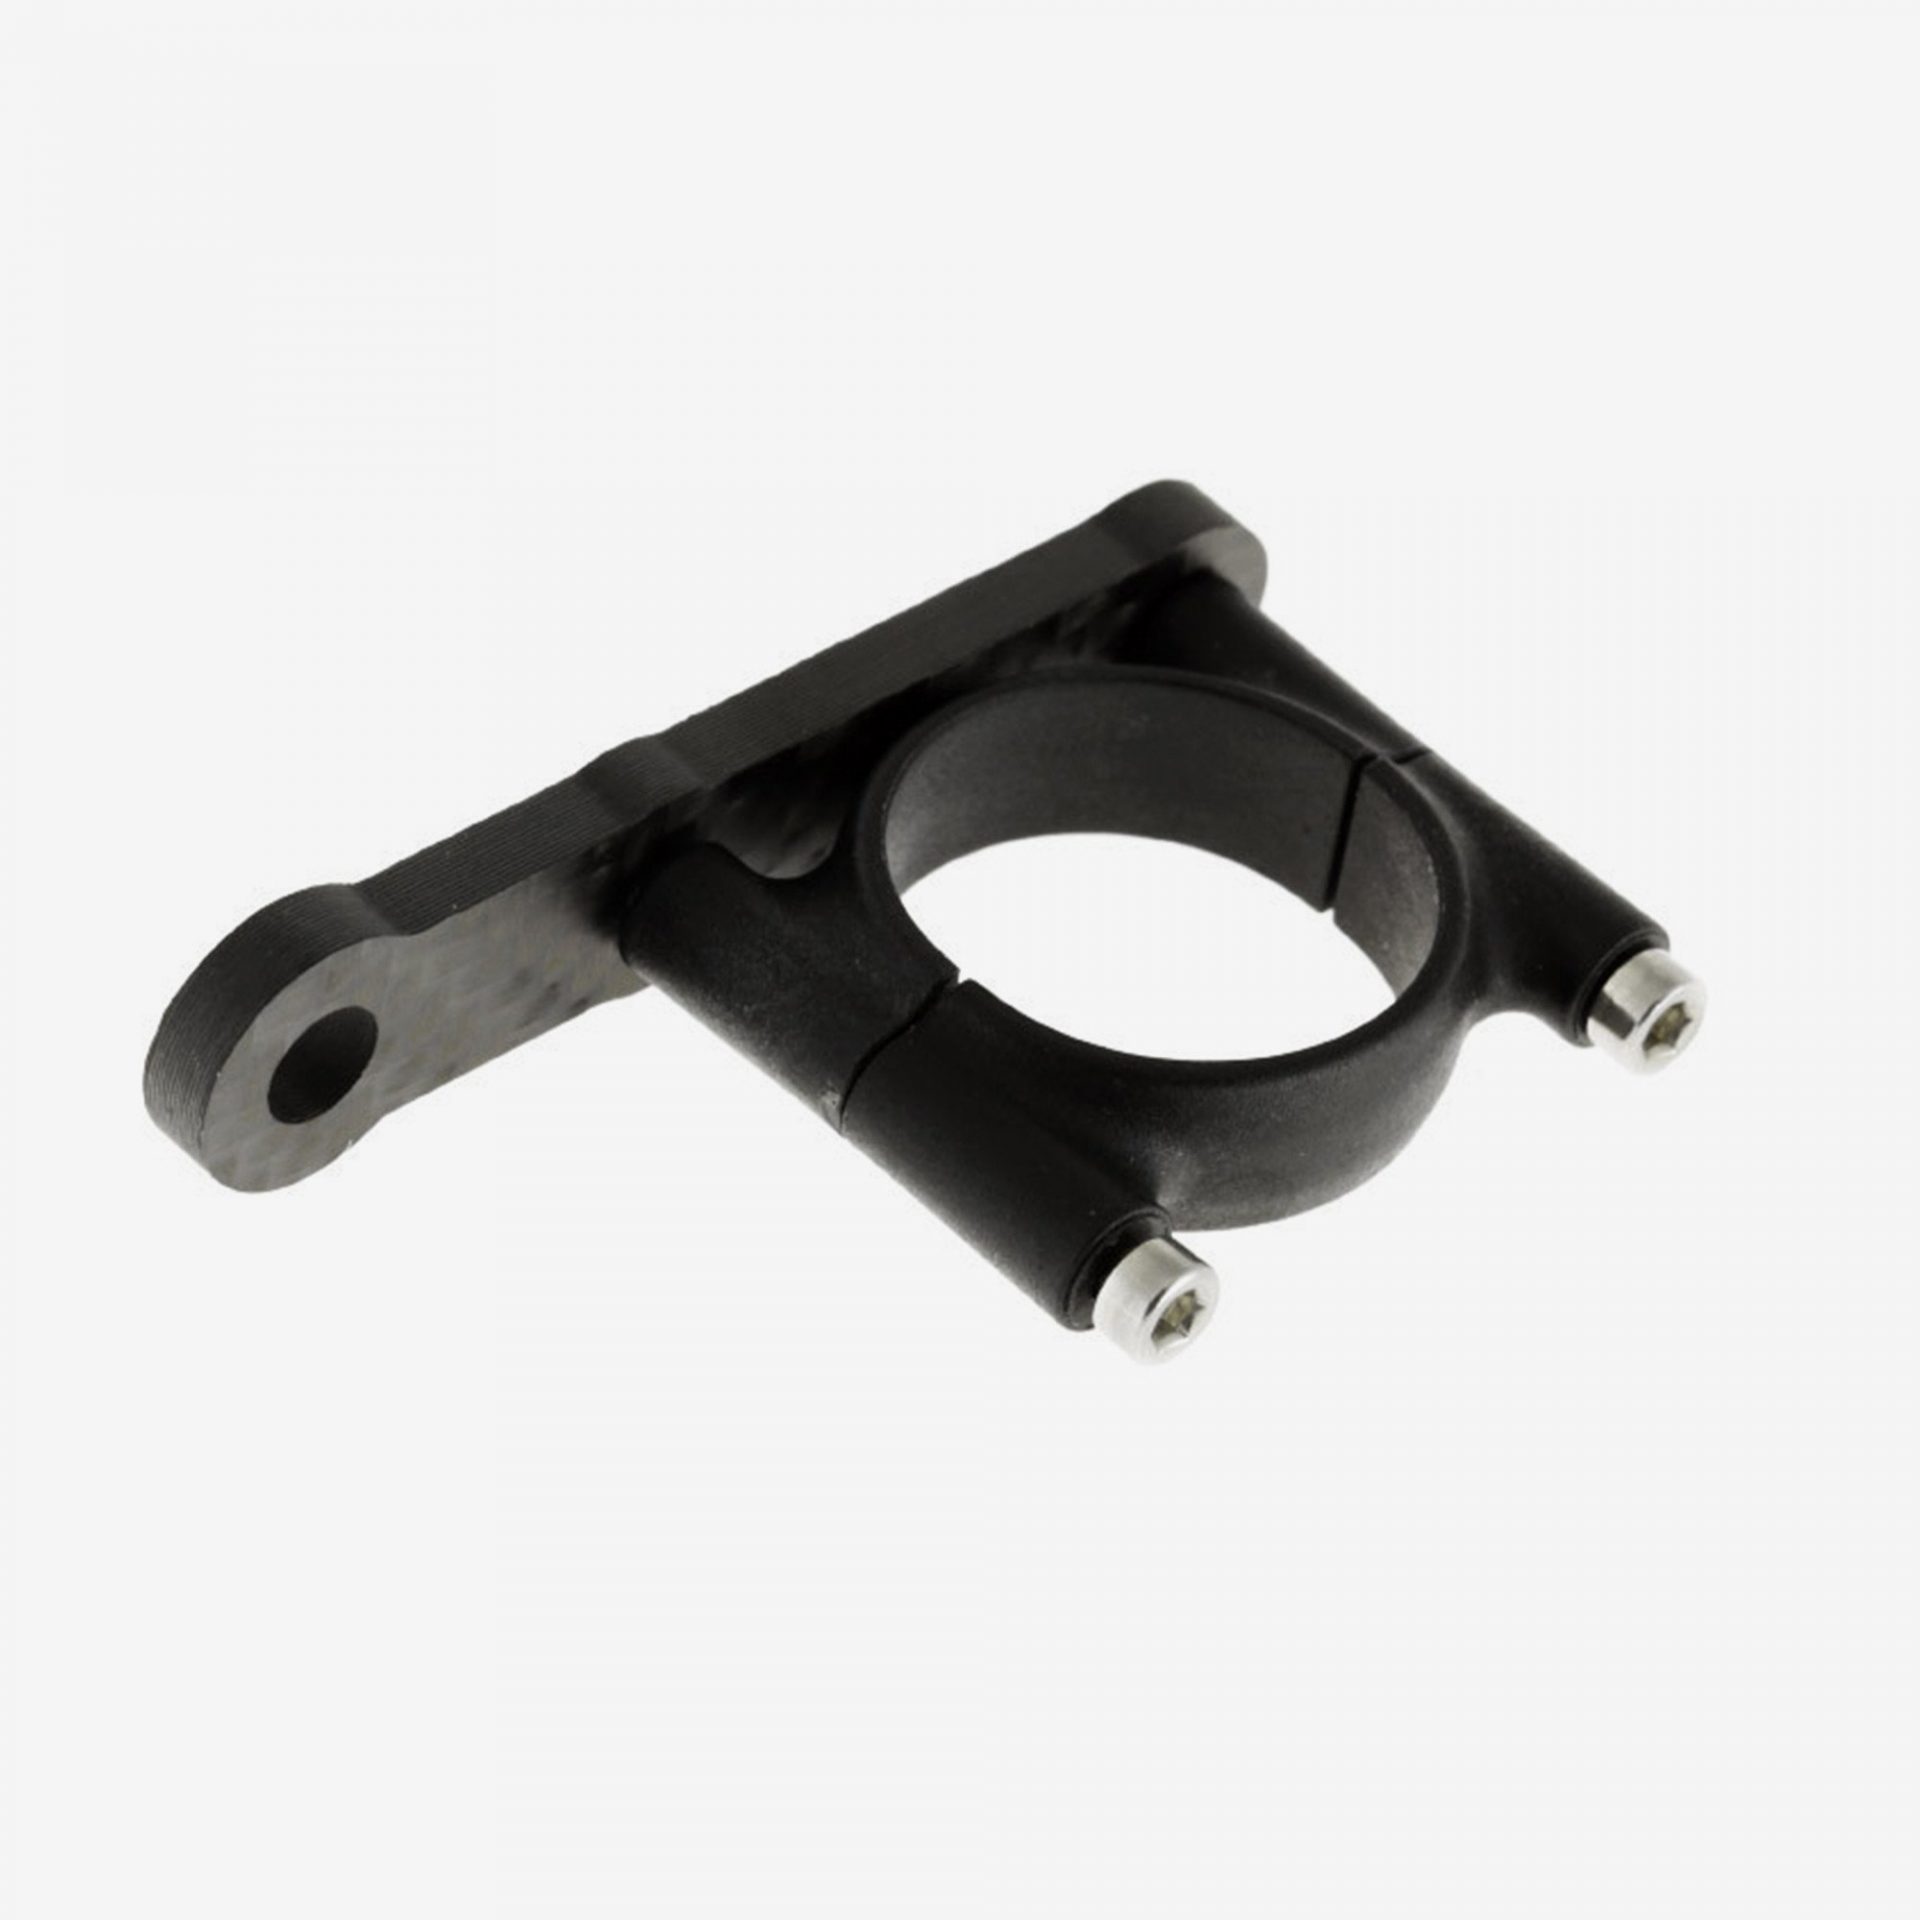 FreeFly Accessory Mount